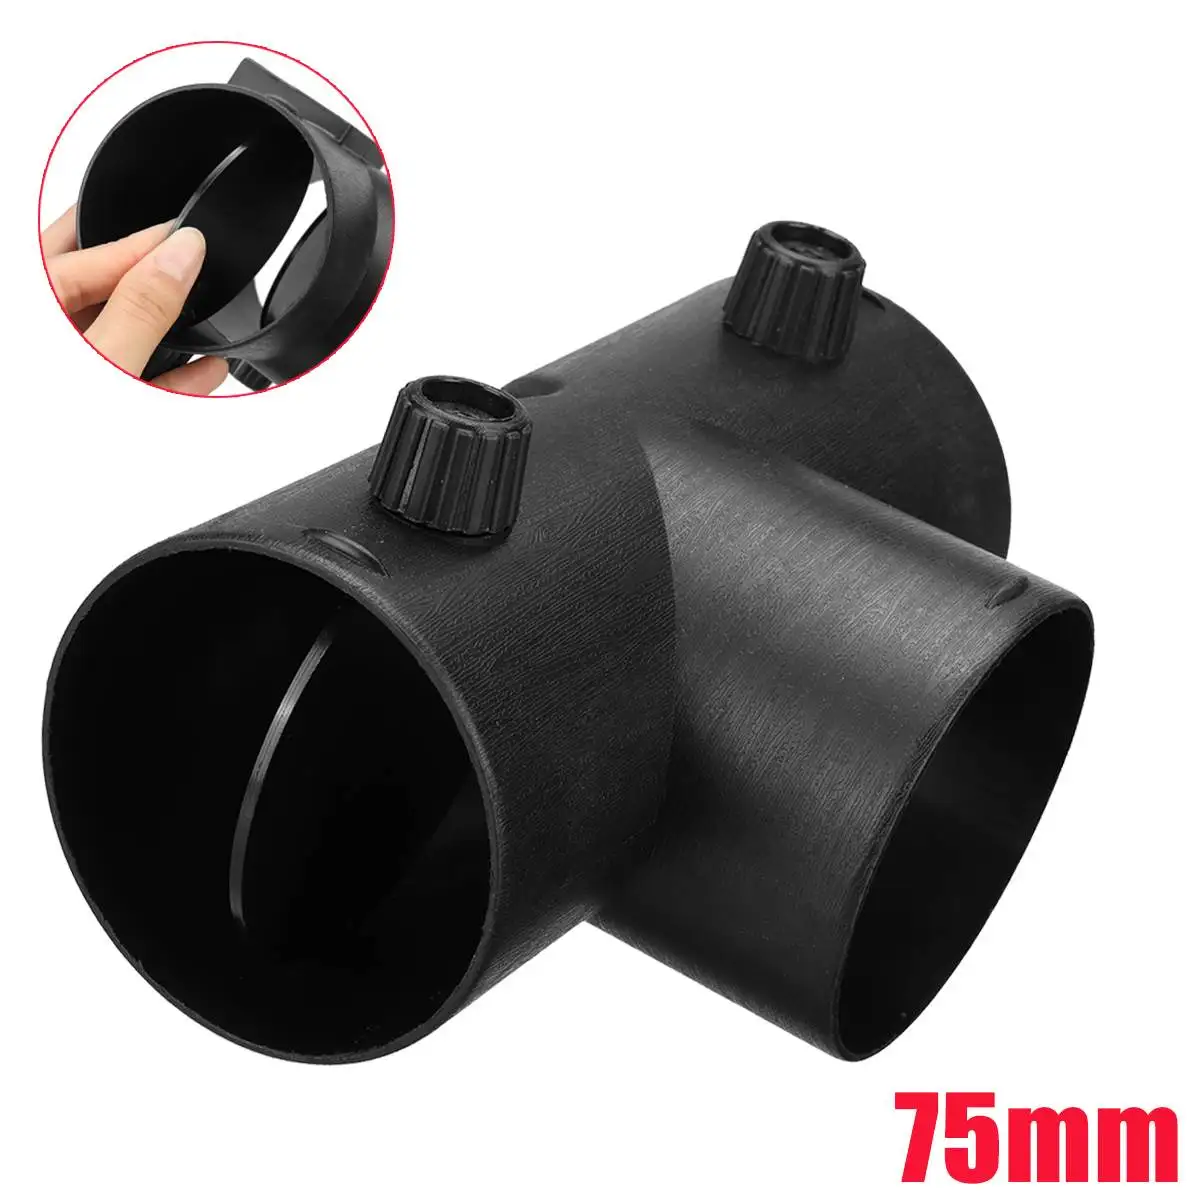 60mm Air Vent Ducting T-out Connector Elbow Pipe Outlet Exhaust Connector Joiner For Webasto Eberspaecher Diesel Parking Heater